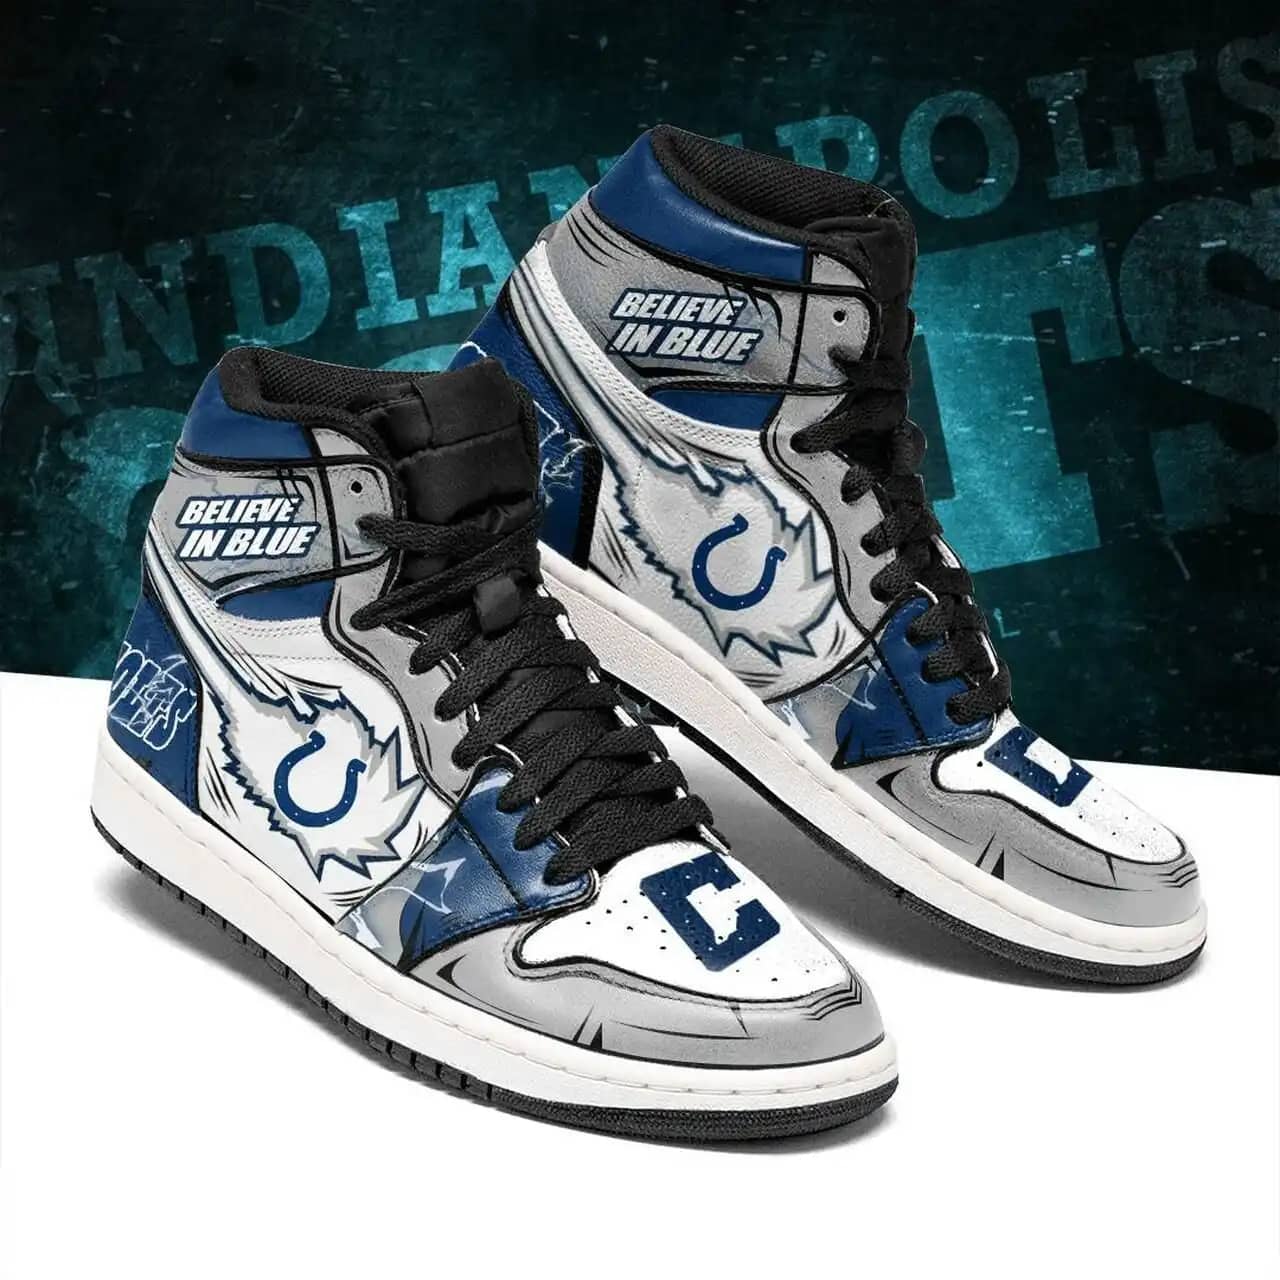 Indianapolis Colts Nfl American Football Team Perfect Gift For Sports Fans Air Jordan Shoes